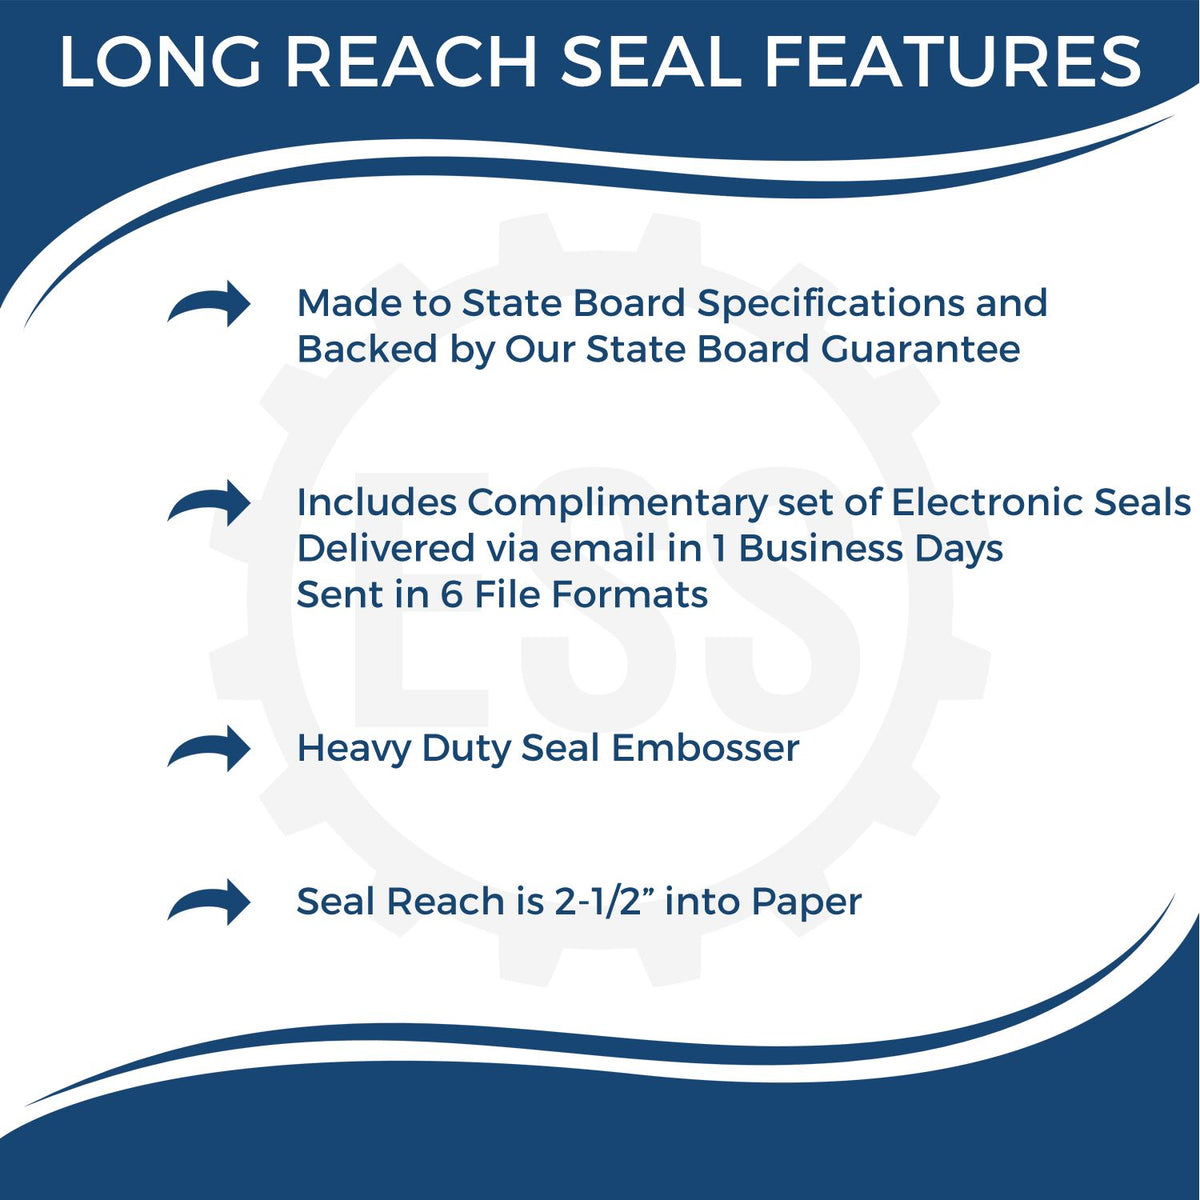 A picture of an infographic highlighting the selling points for the Long Reach Florida Geology Seal